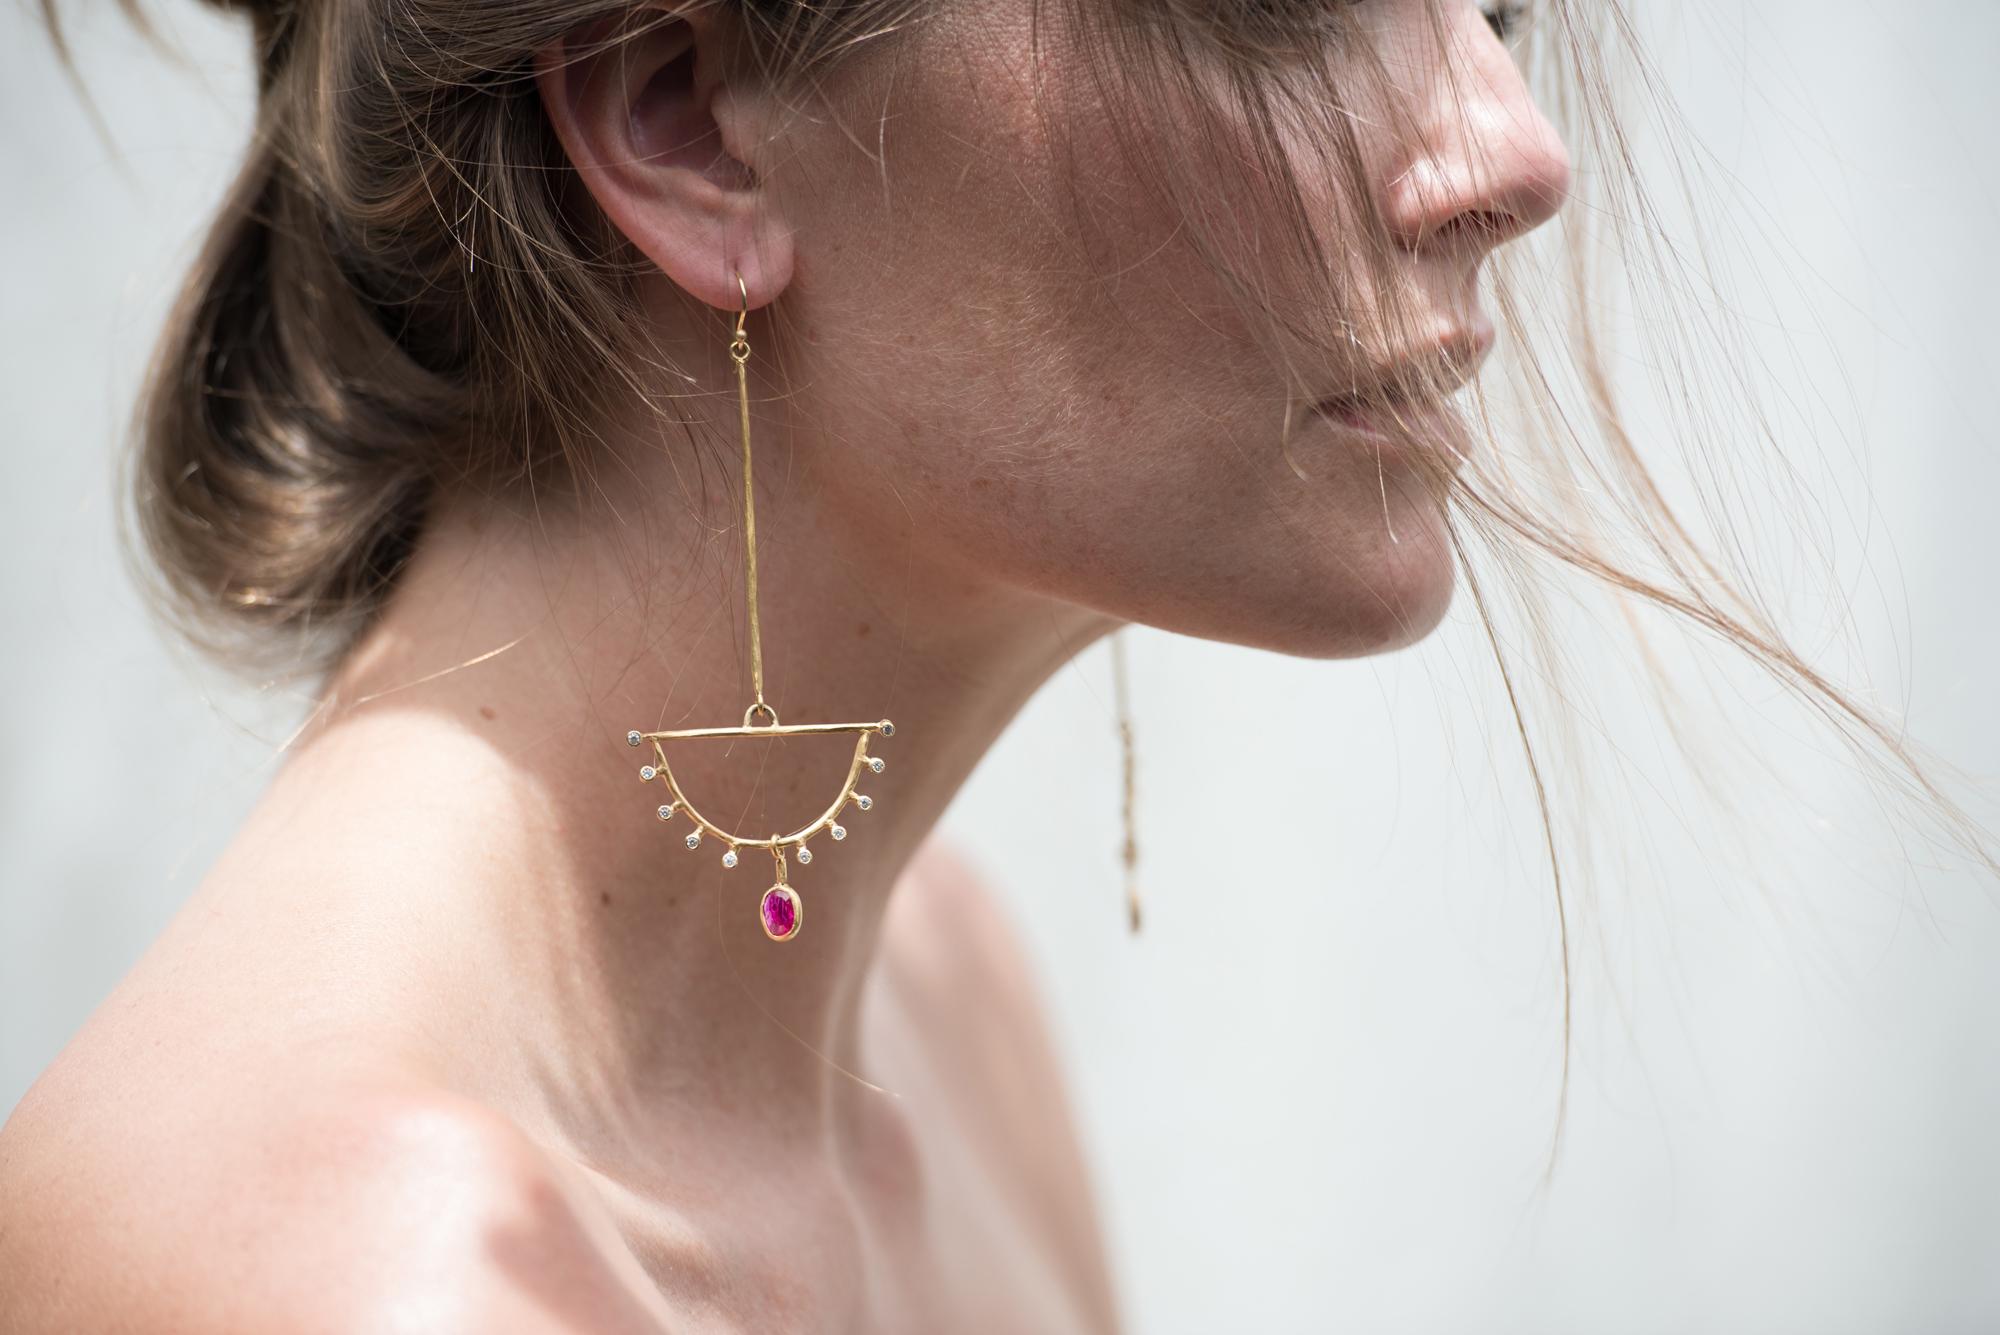 A beautifully hued, rose cut, Mozambique ruby sways freely from the inverted diamond studded fan.  This pair is extremely comfortable to wear and adds just the right amount of sparkle and pop of color.  Handcrafted of rich 22k yellow gold, each